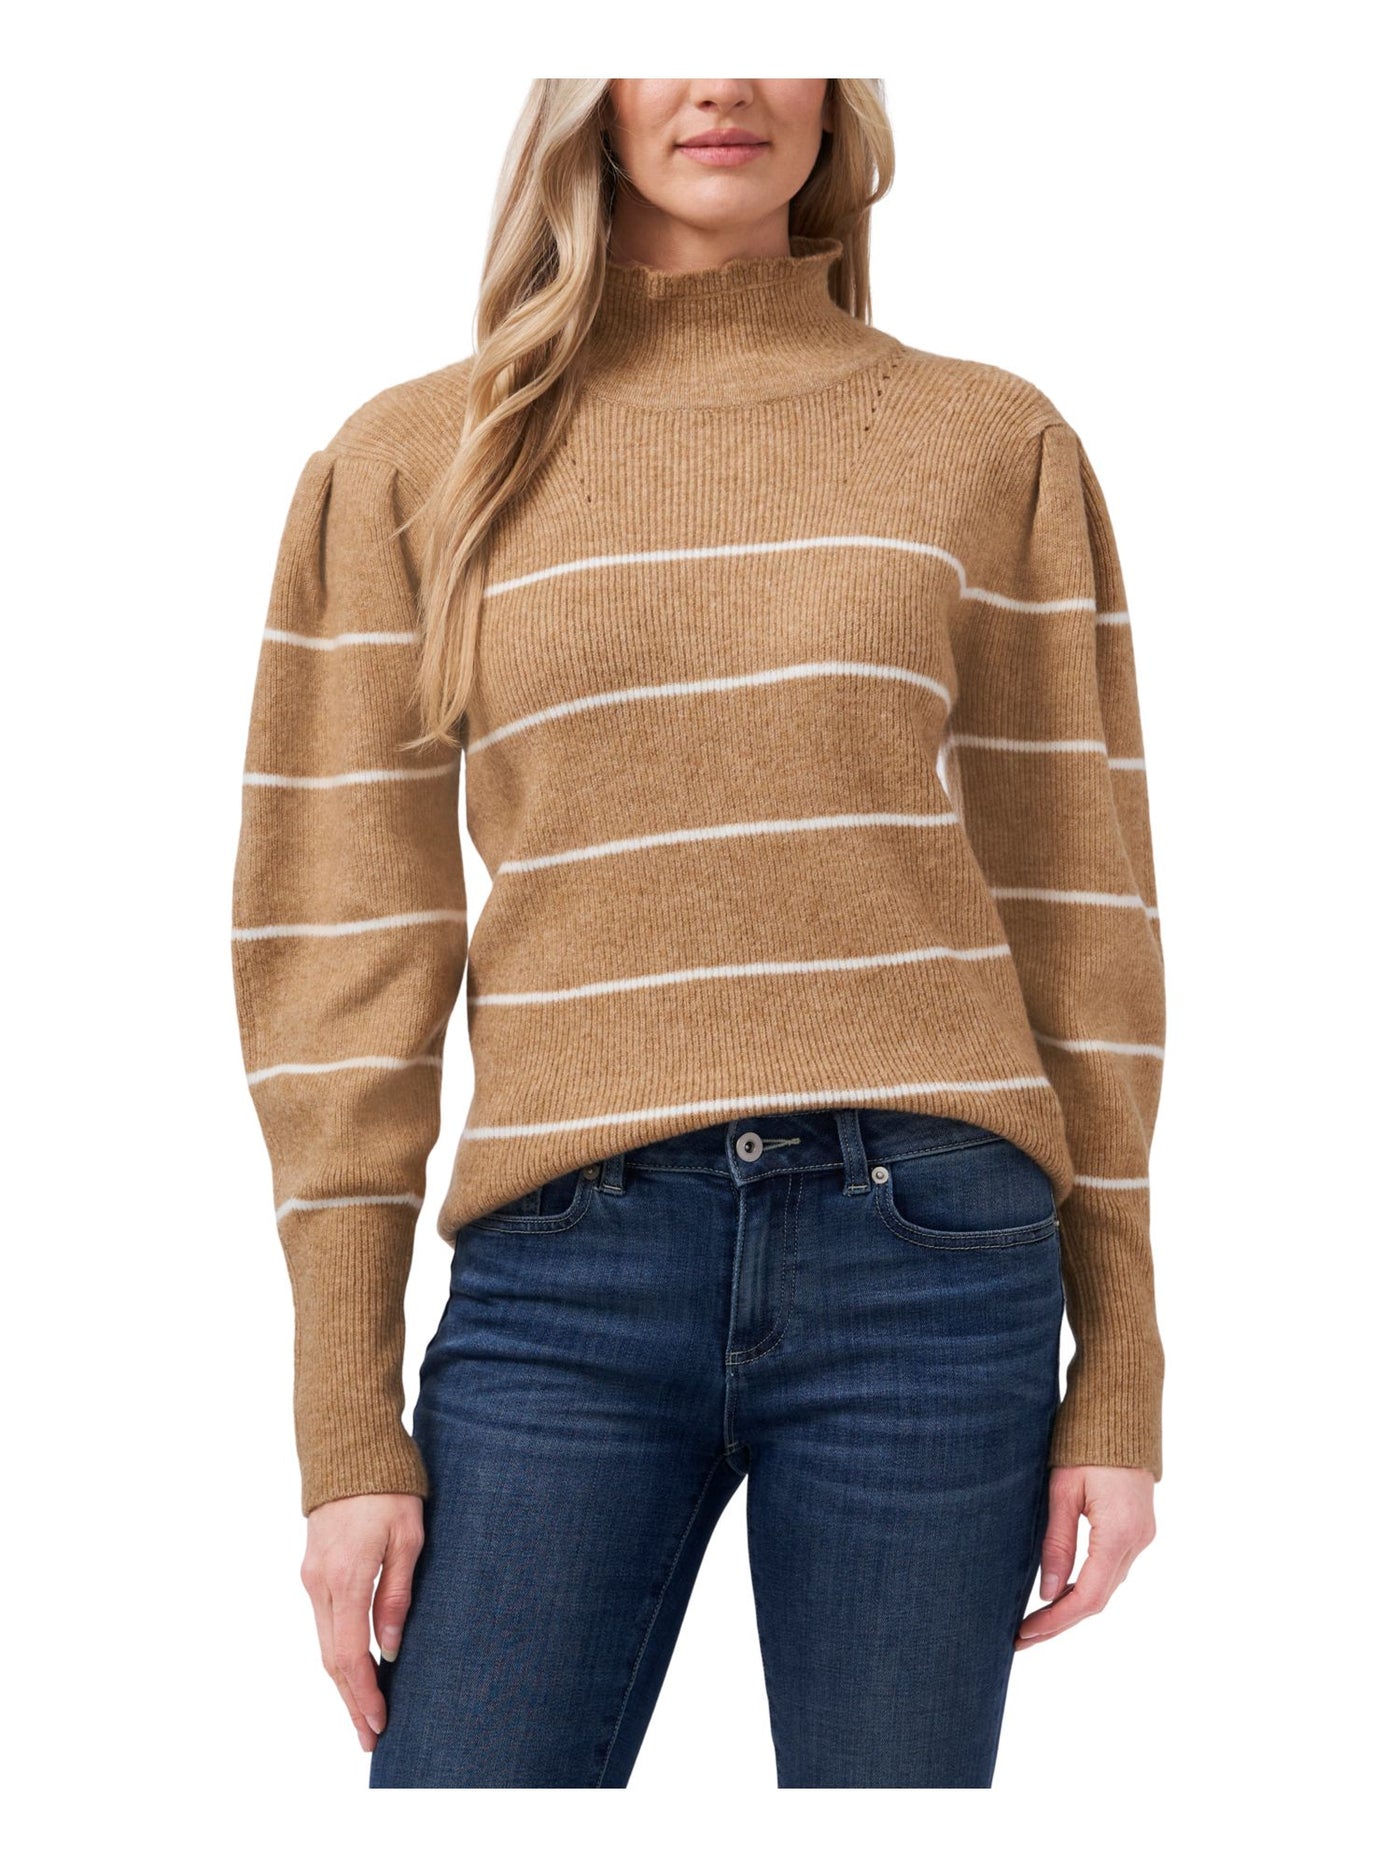 CECE Womens Brown Ribbed Striped Long Sleeve Mock Neck Sweater S